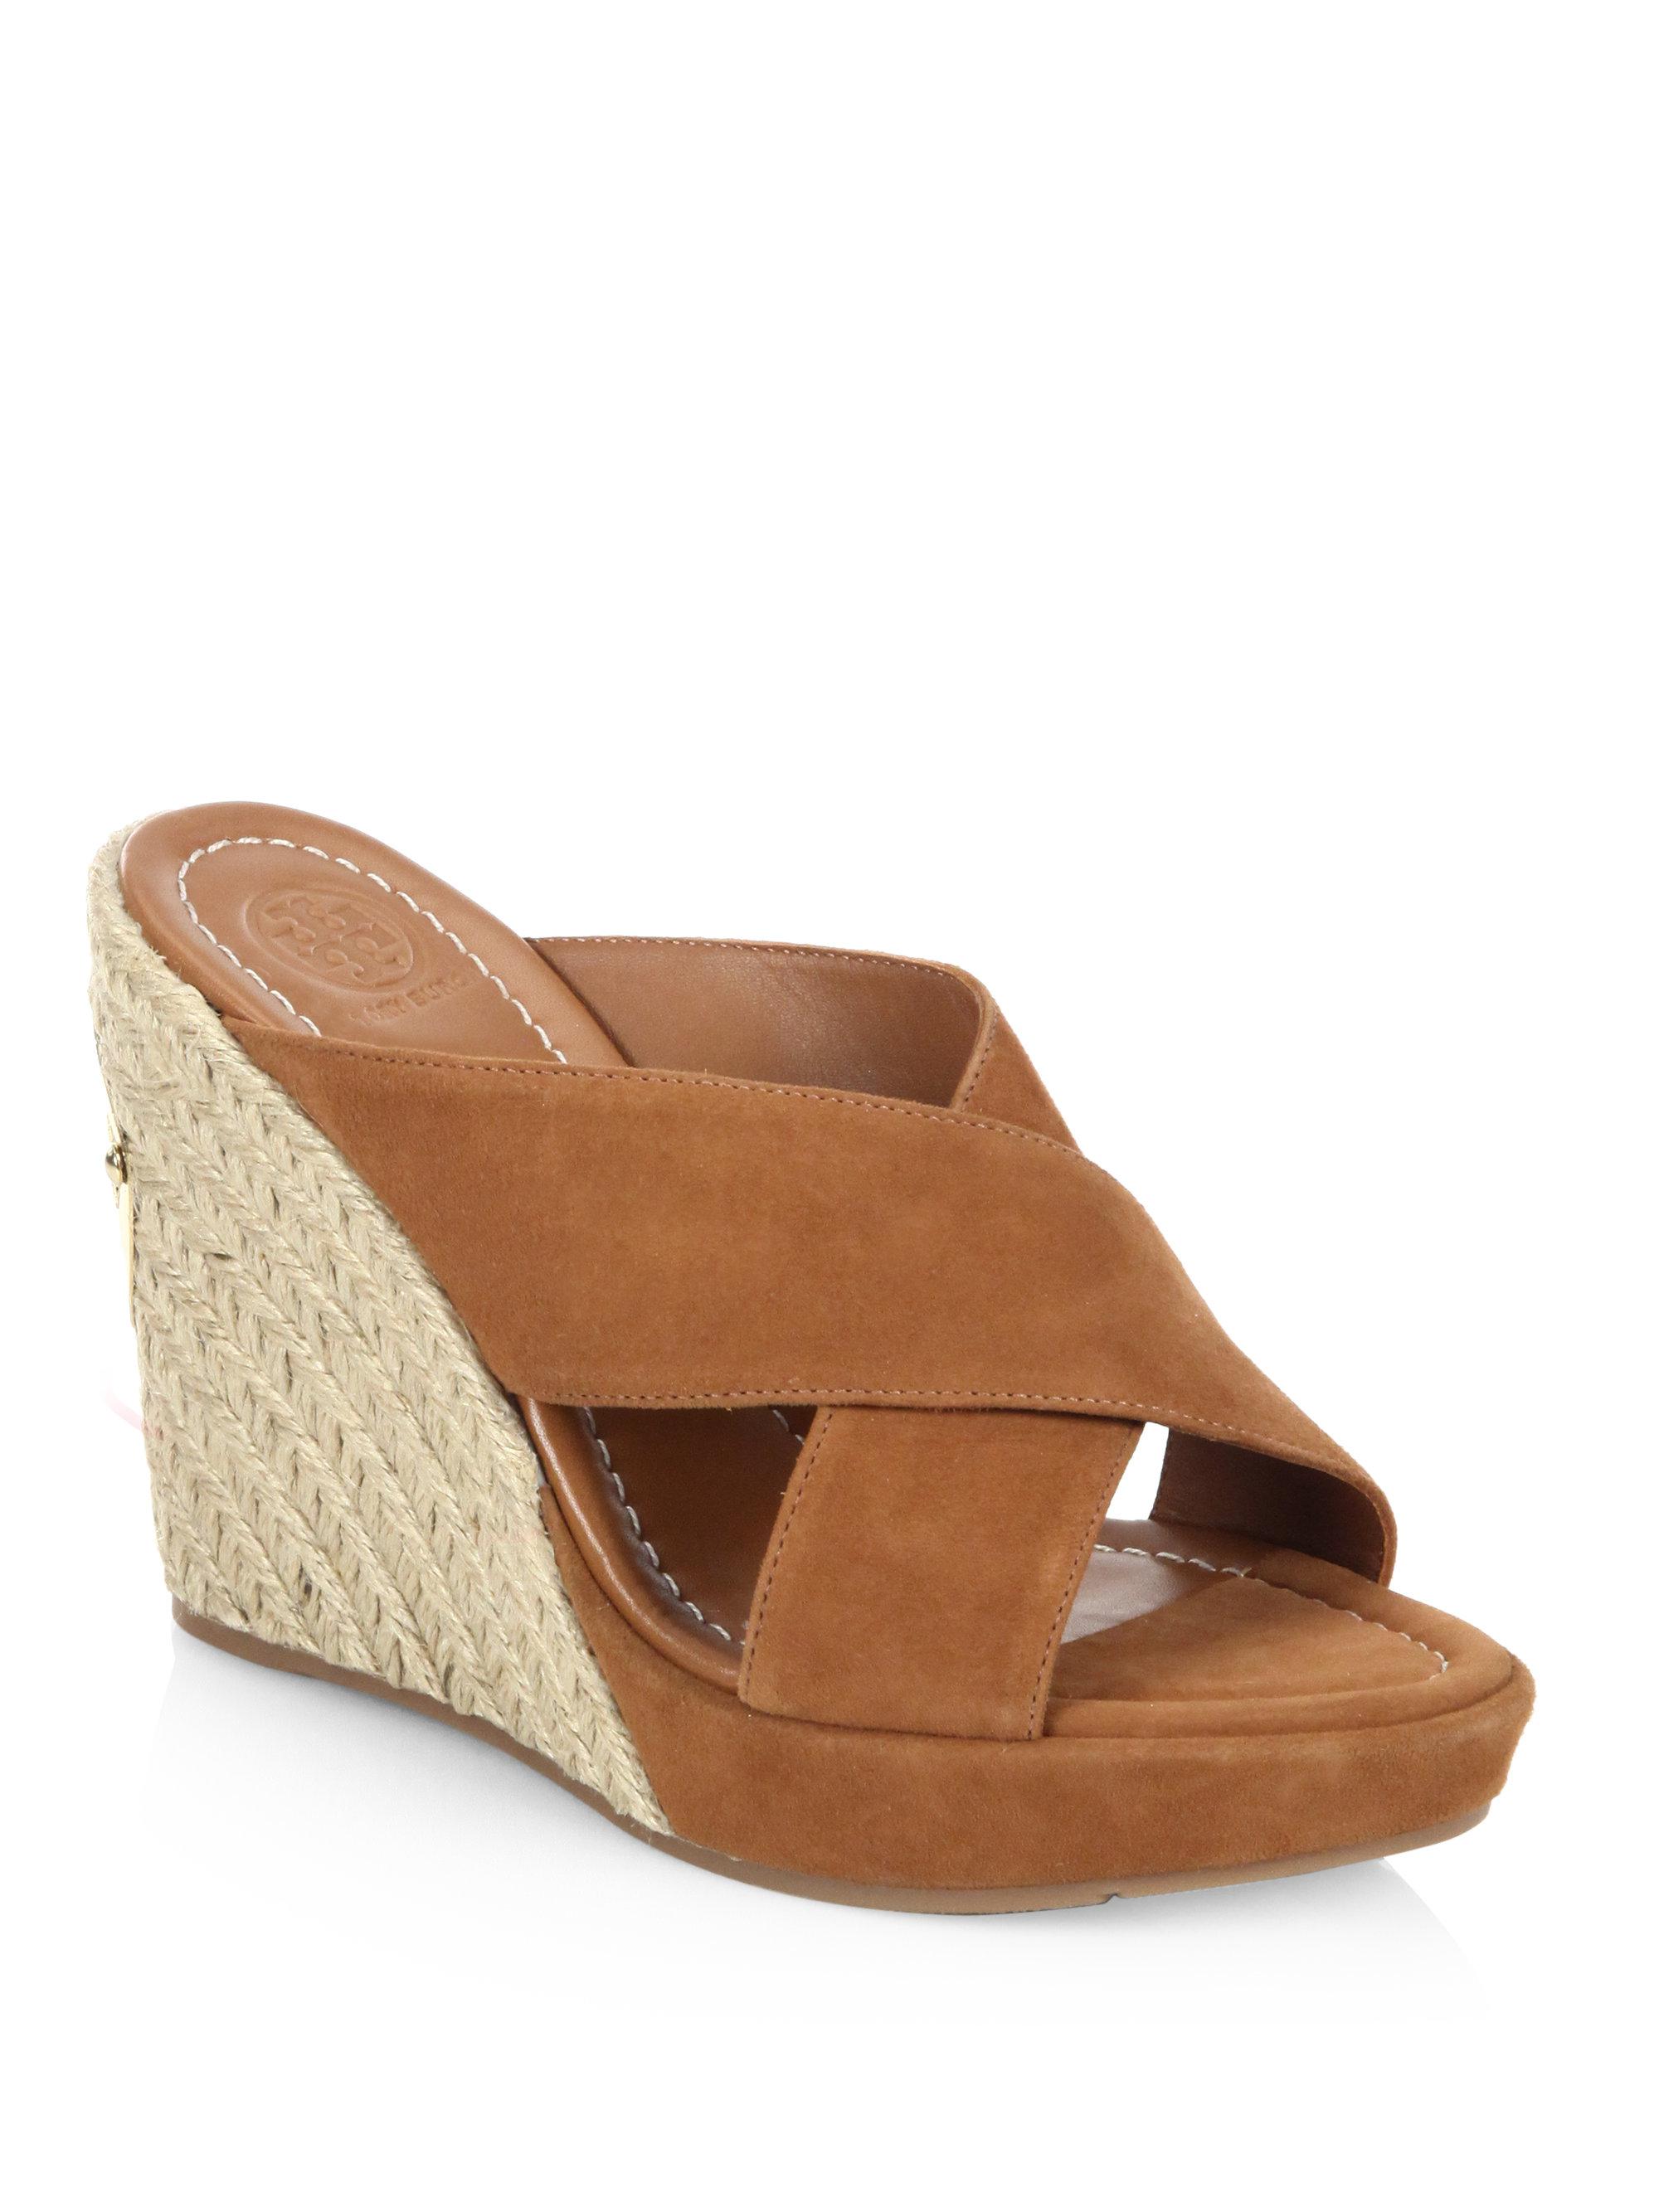 Tory Burch Bailey Leather Wedge Mules in Brown | Lyst